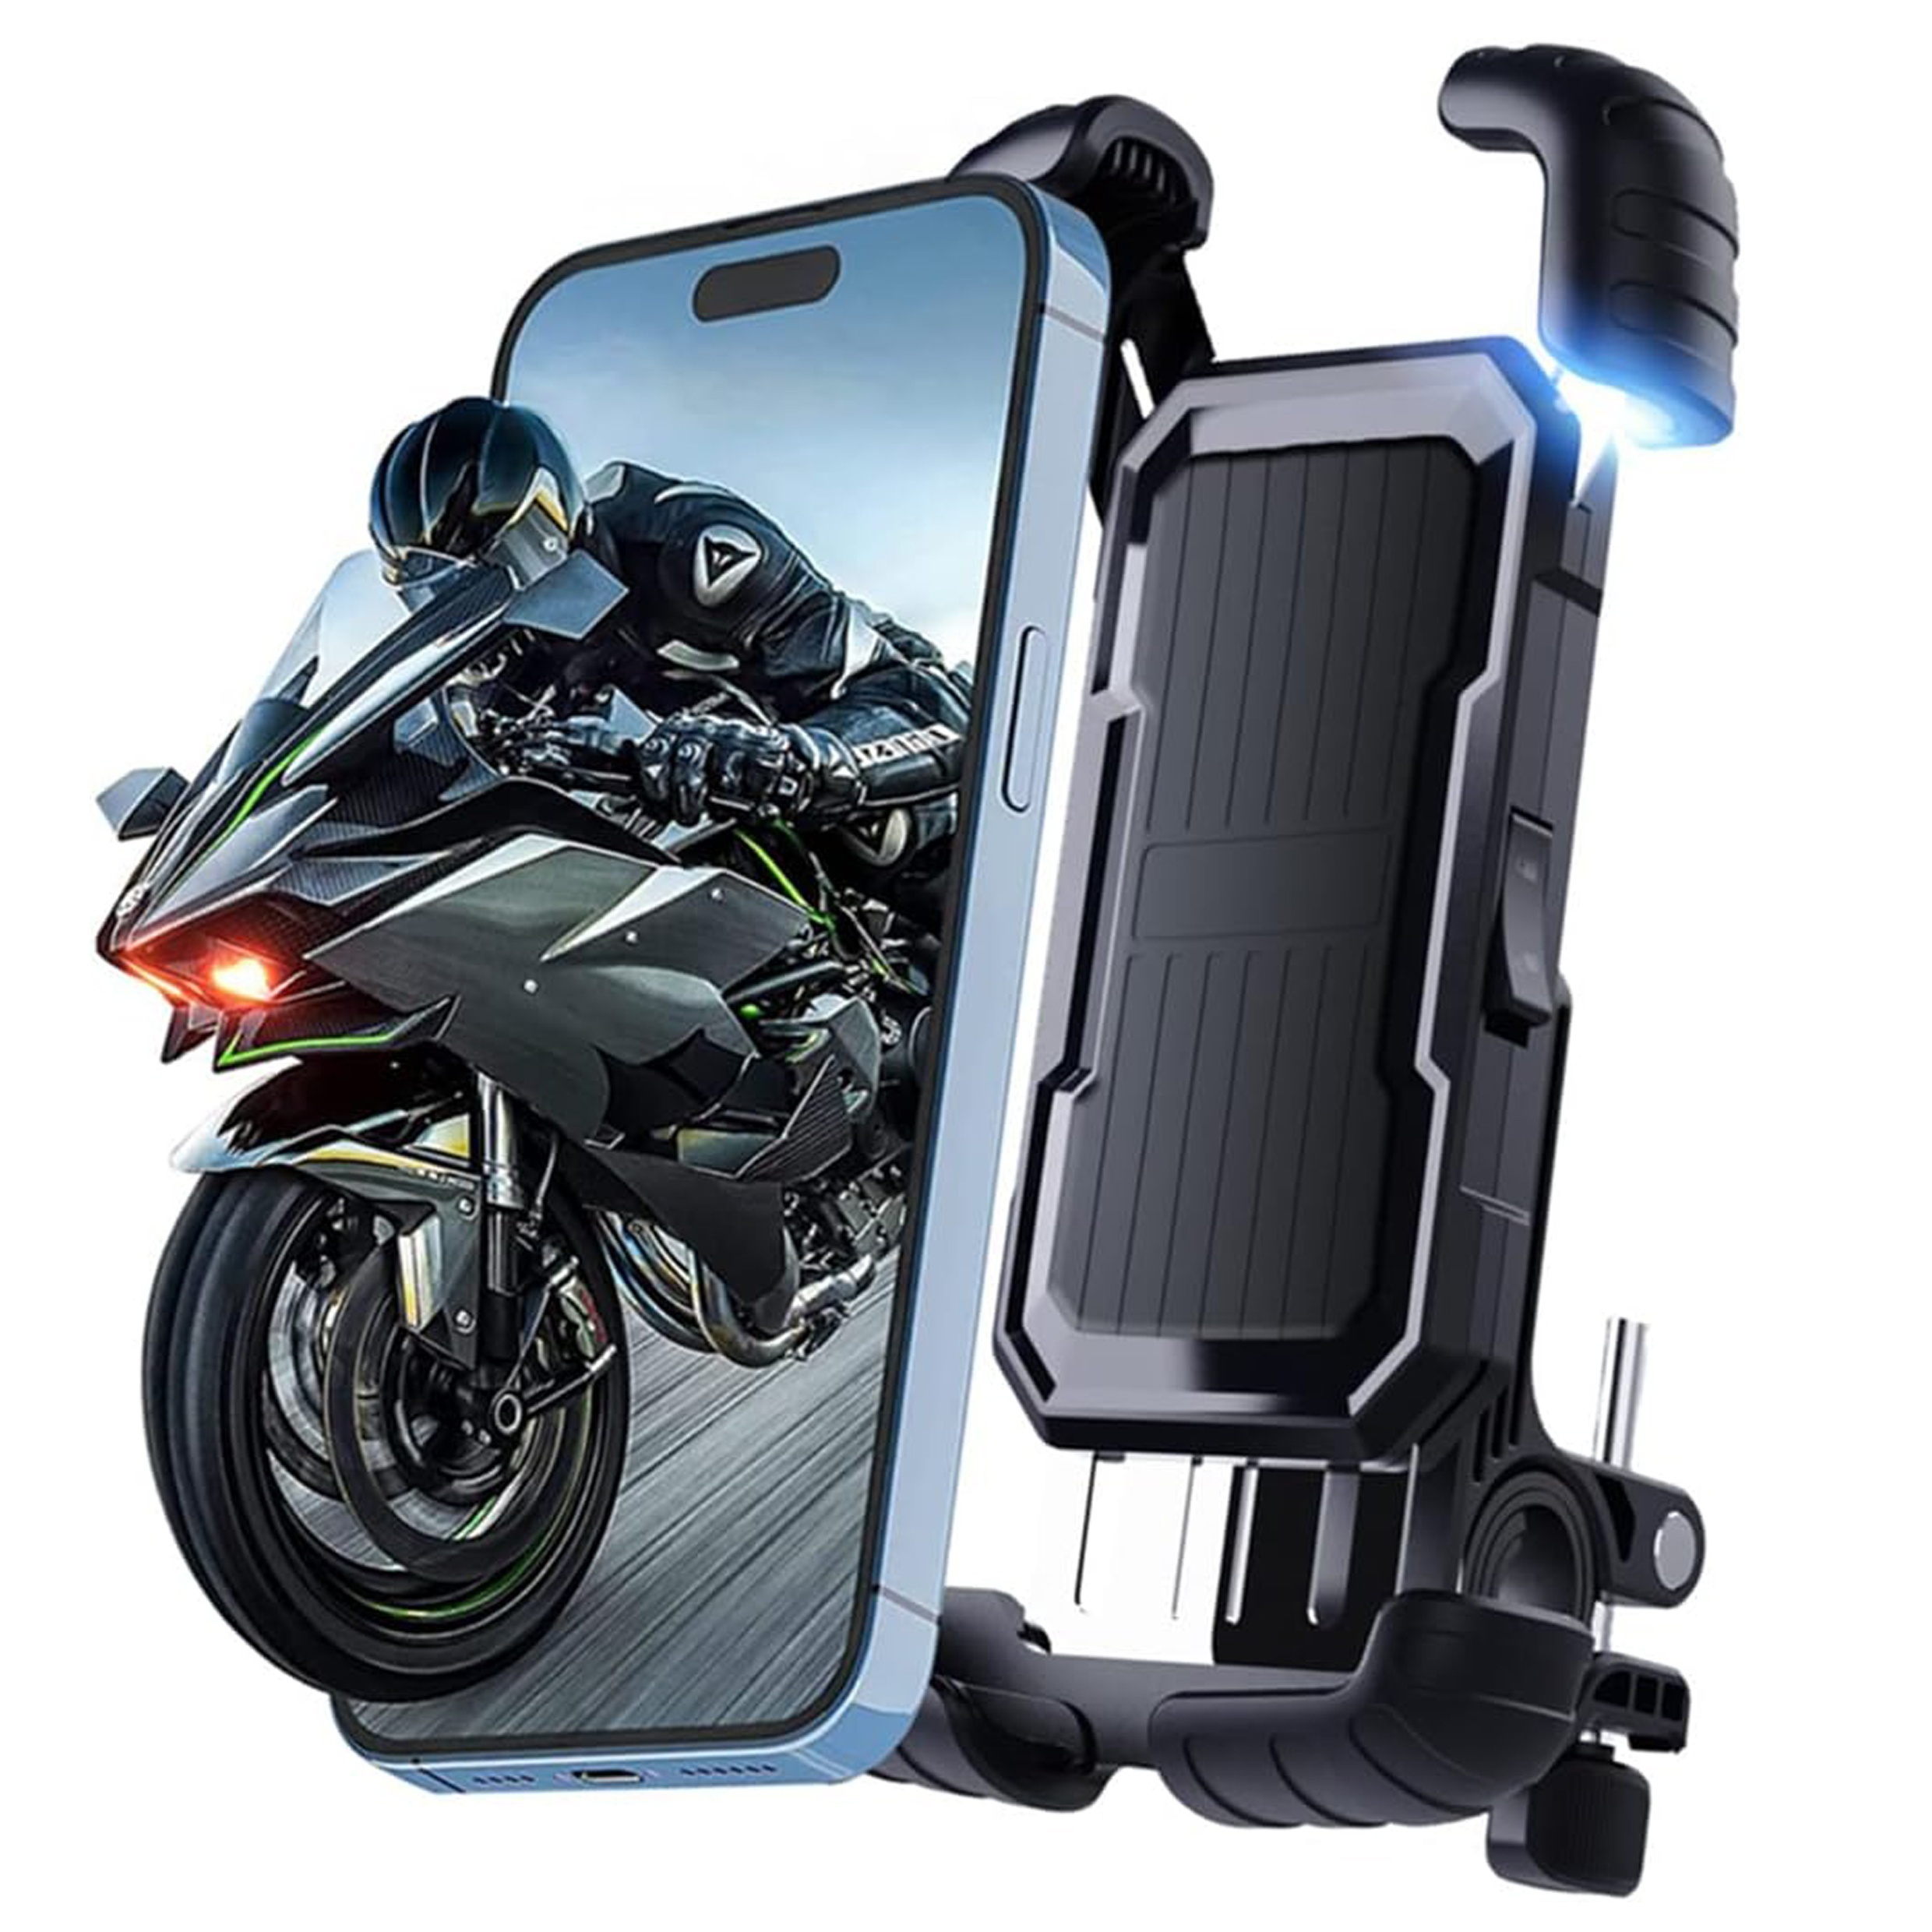 

Motorcycle Phone Mount, Upgrade Never Fall Off/0 Shake Bike Phone Mount, 3s Put & Take 360° Rotatable Phone Holder For Motorcycle Bike Bicycle Scooter Compatible With Cellphones 4.7-6.8in